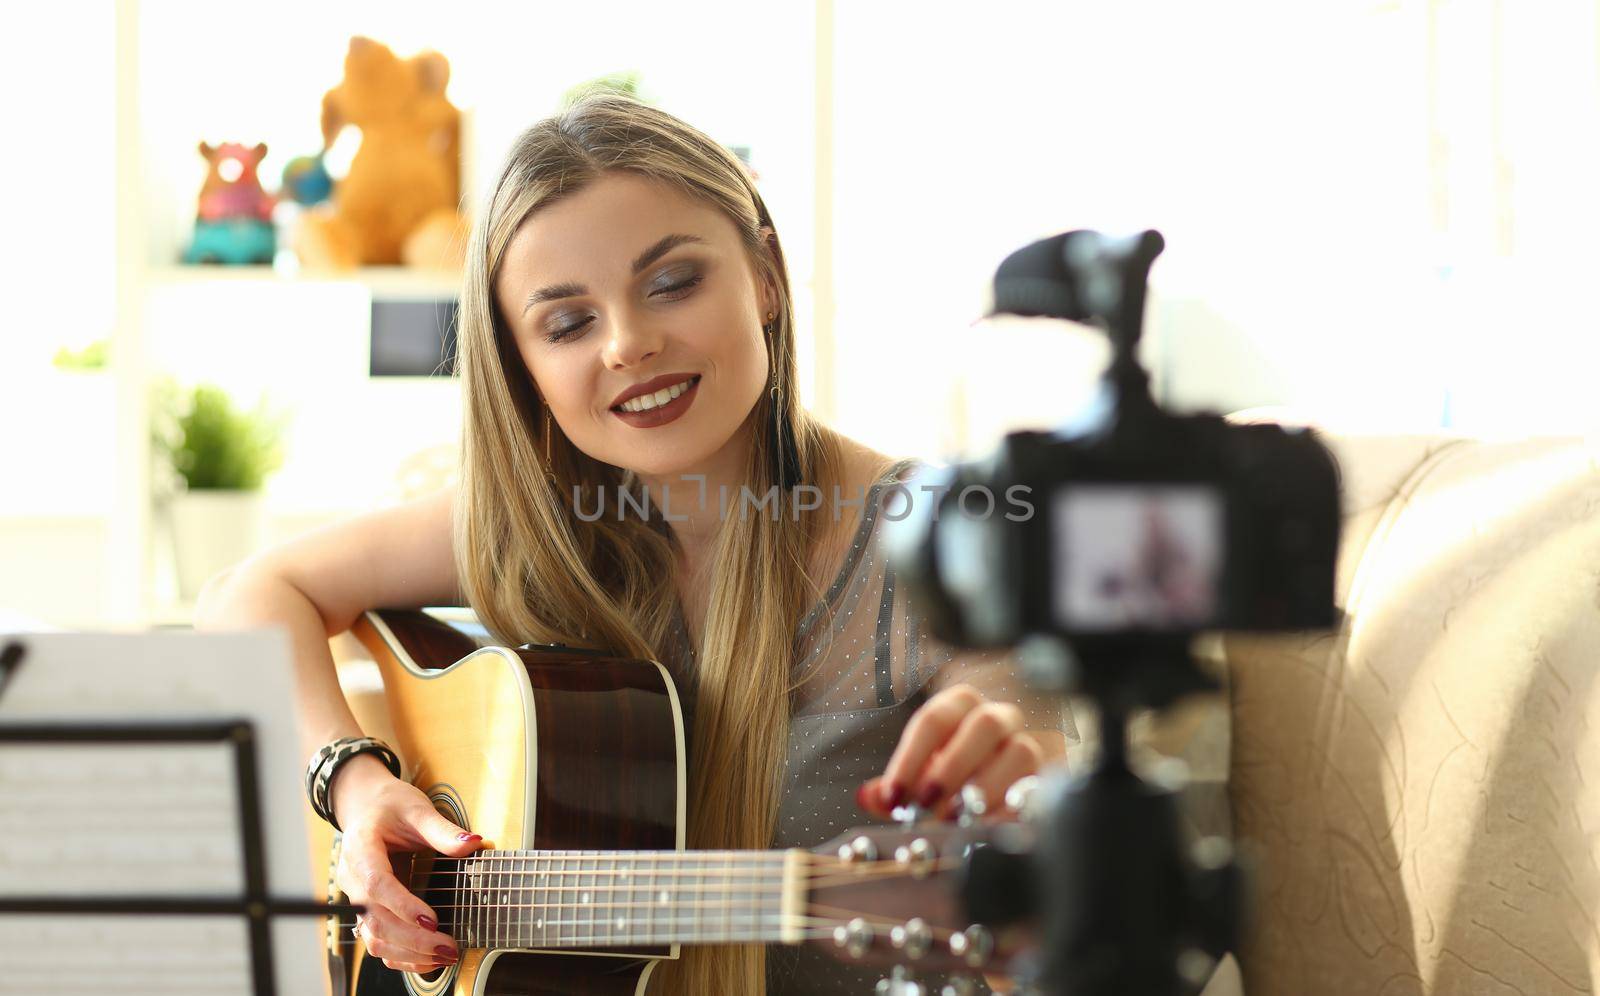 Young woman plays acoustic guitar and records video clips for social networks. Amateur musician creates content at home using modern camera concept